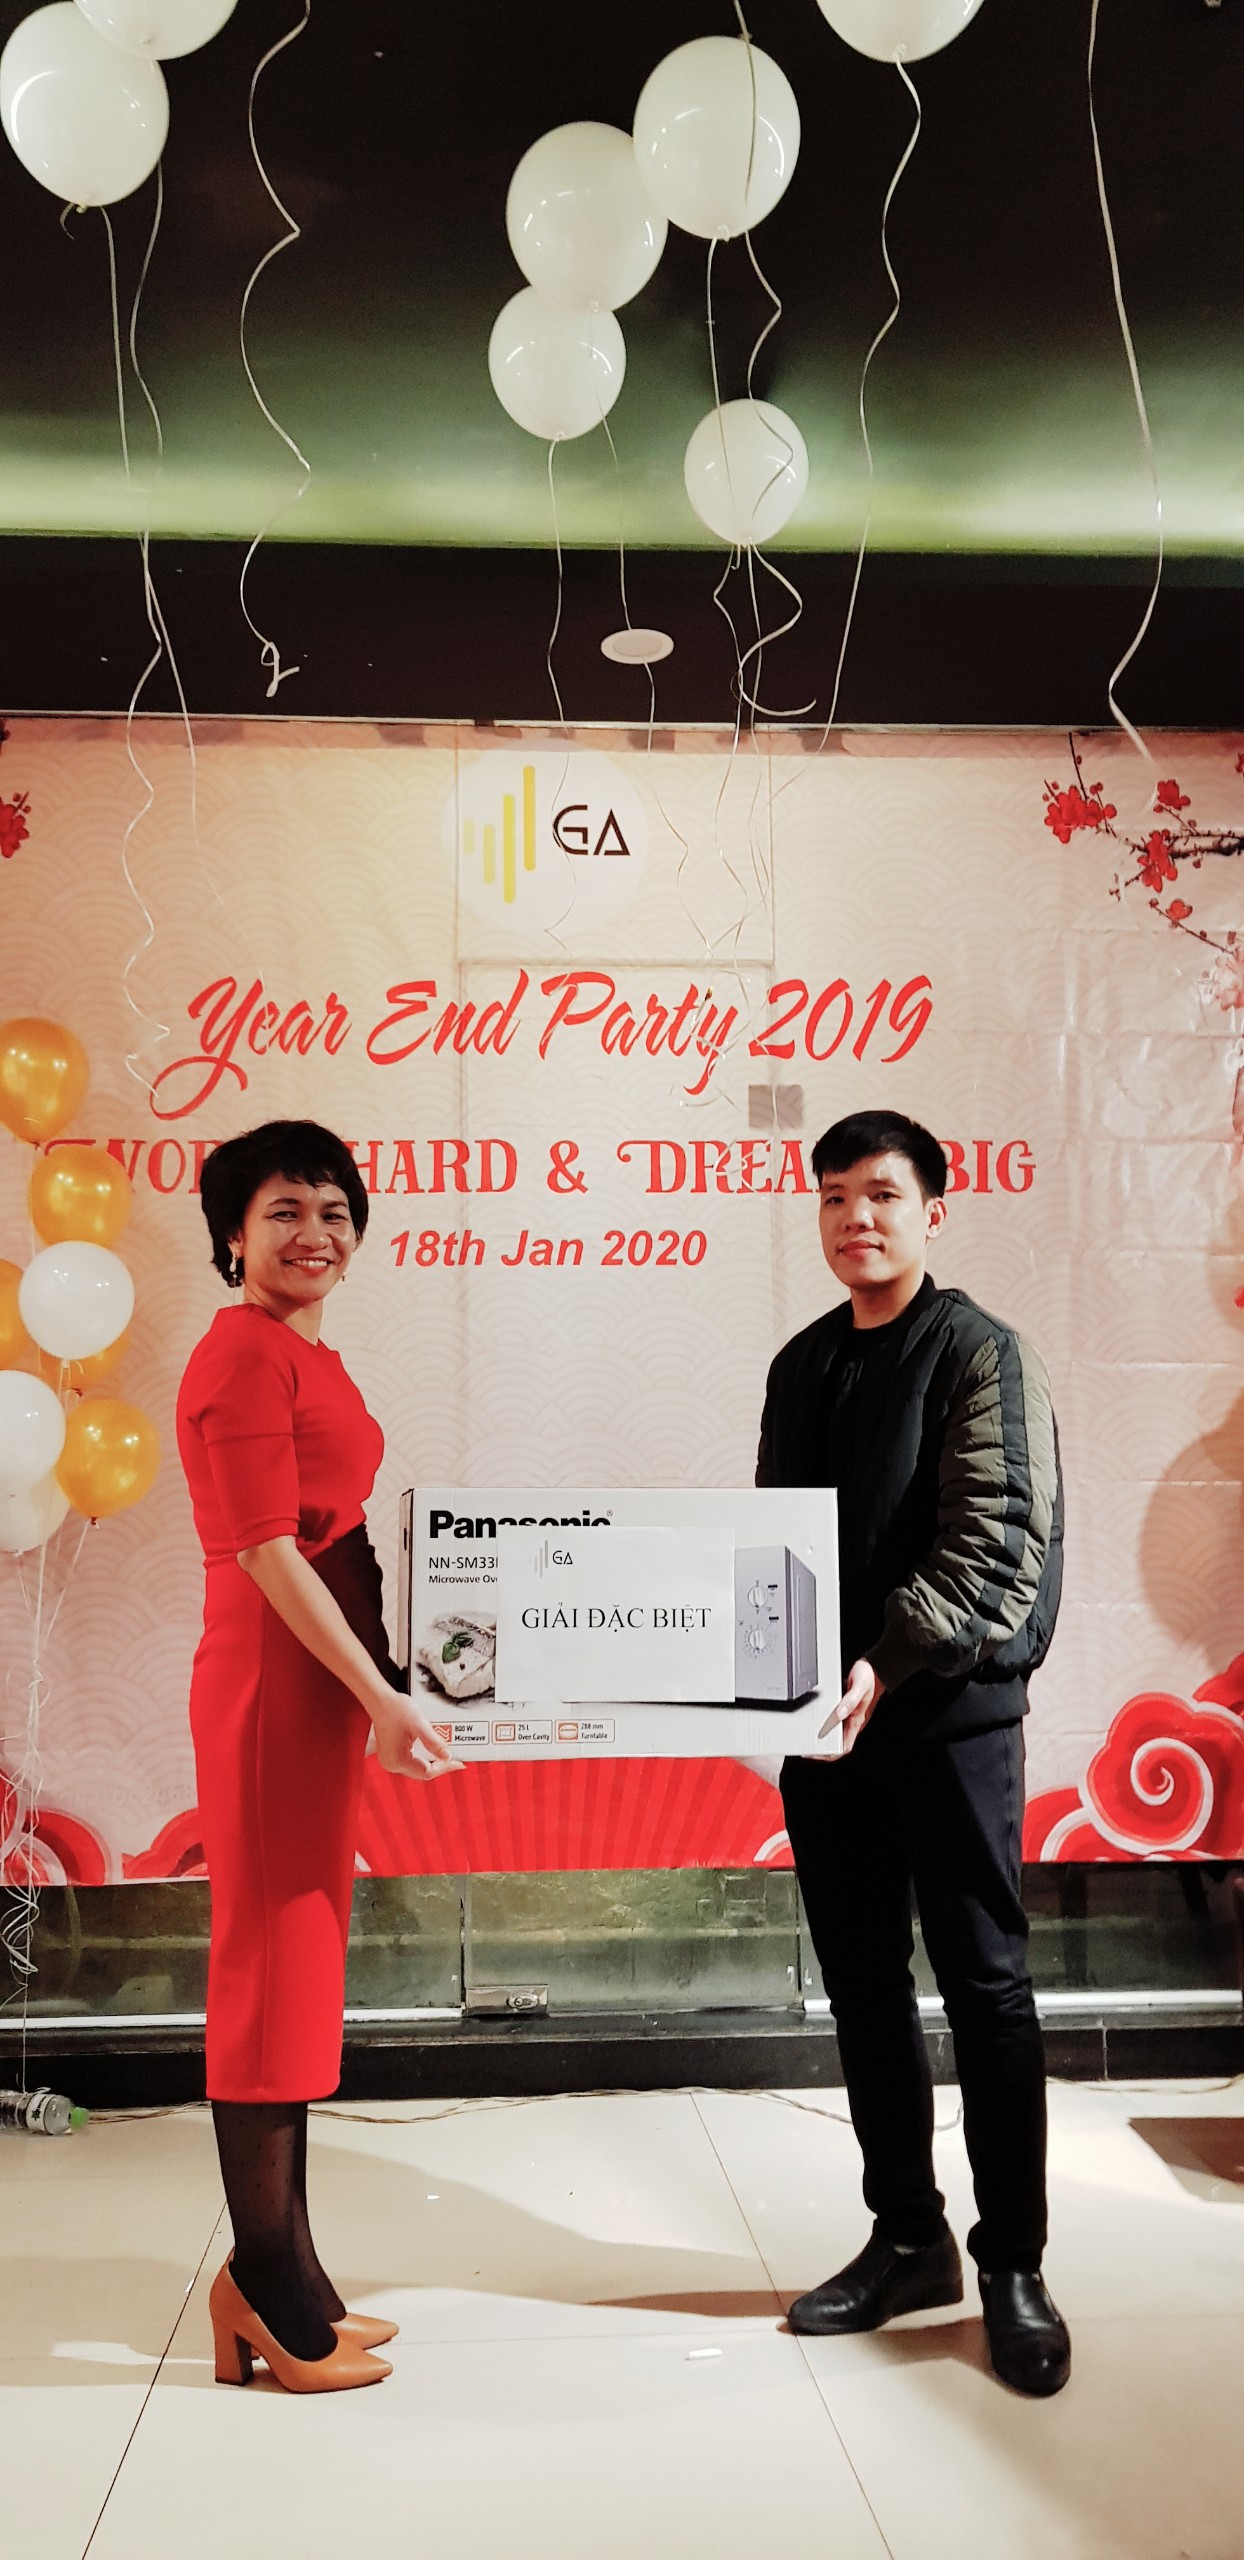 Year End Party 2019 Lucky draw giai dac biet